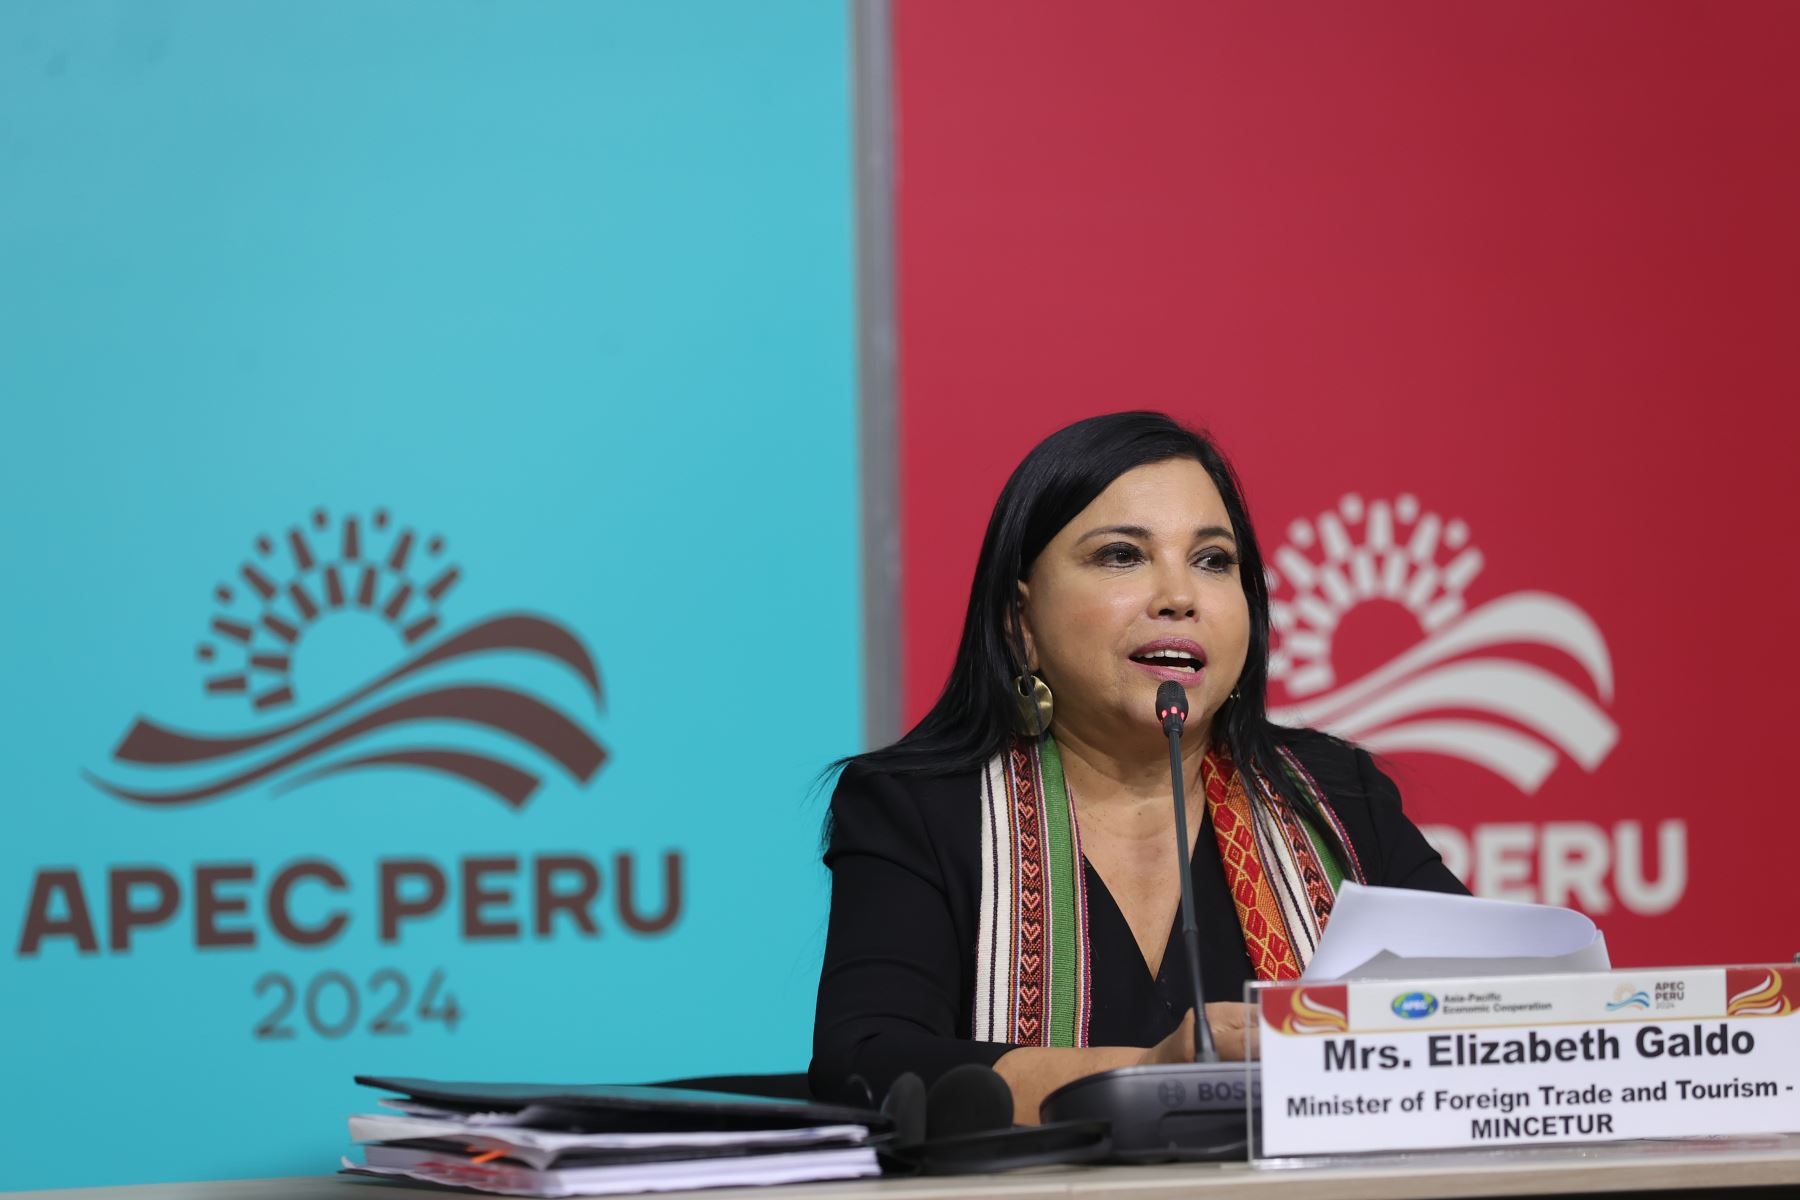 APEC Peru 2024 Ministers safeguard tourism sector's role as driver of